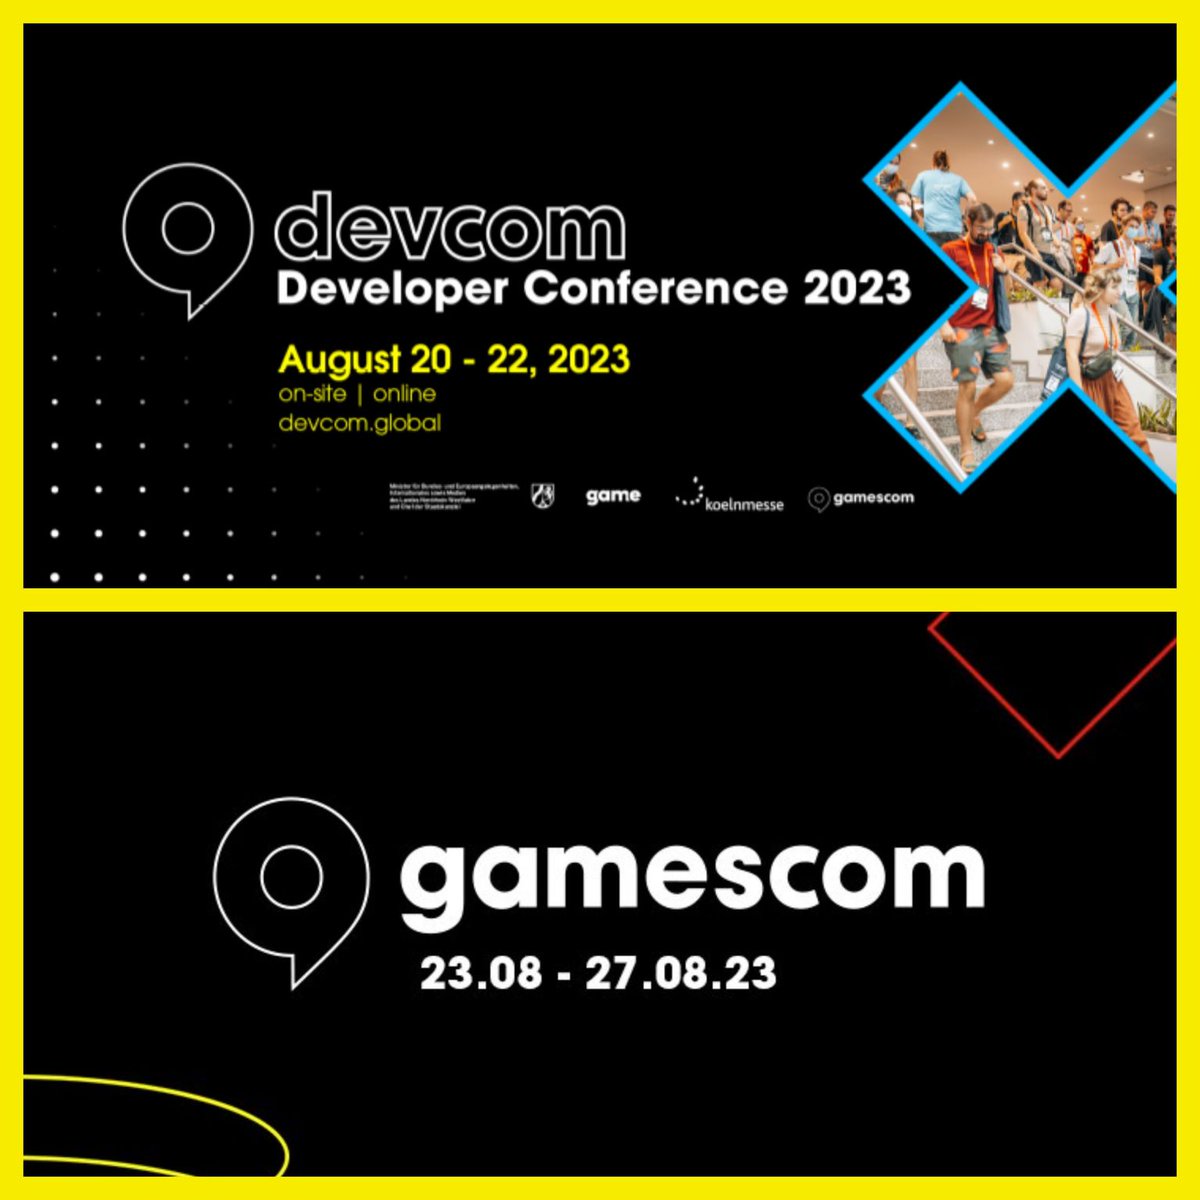 🎮🌍It's that time of the year again! Excited to be back on the world stage speaking at #Gamescom2023   #Devcom2023 as usual! With new insights and reconnecting with industry leaders and experts. Stay tuned for more updates, it's going to be an amazing experience! See you soon!🔥